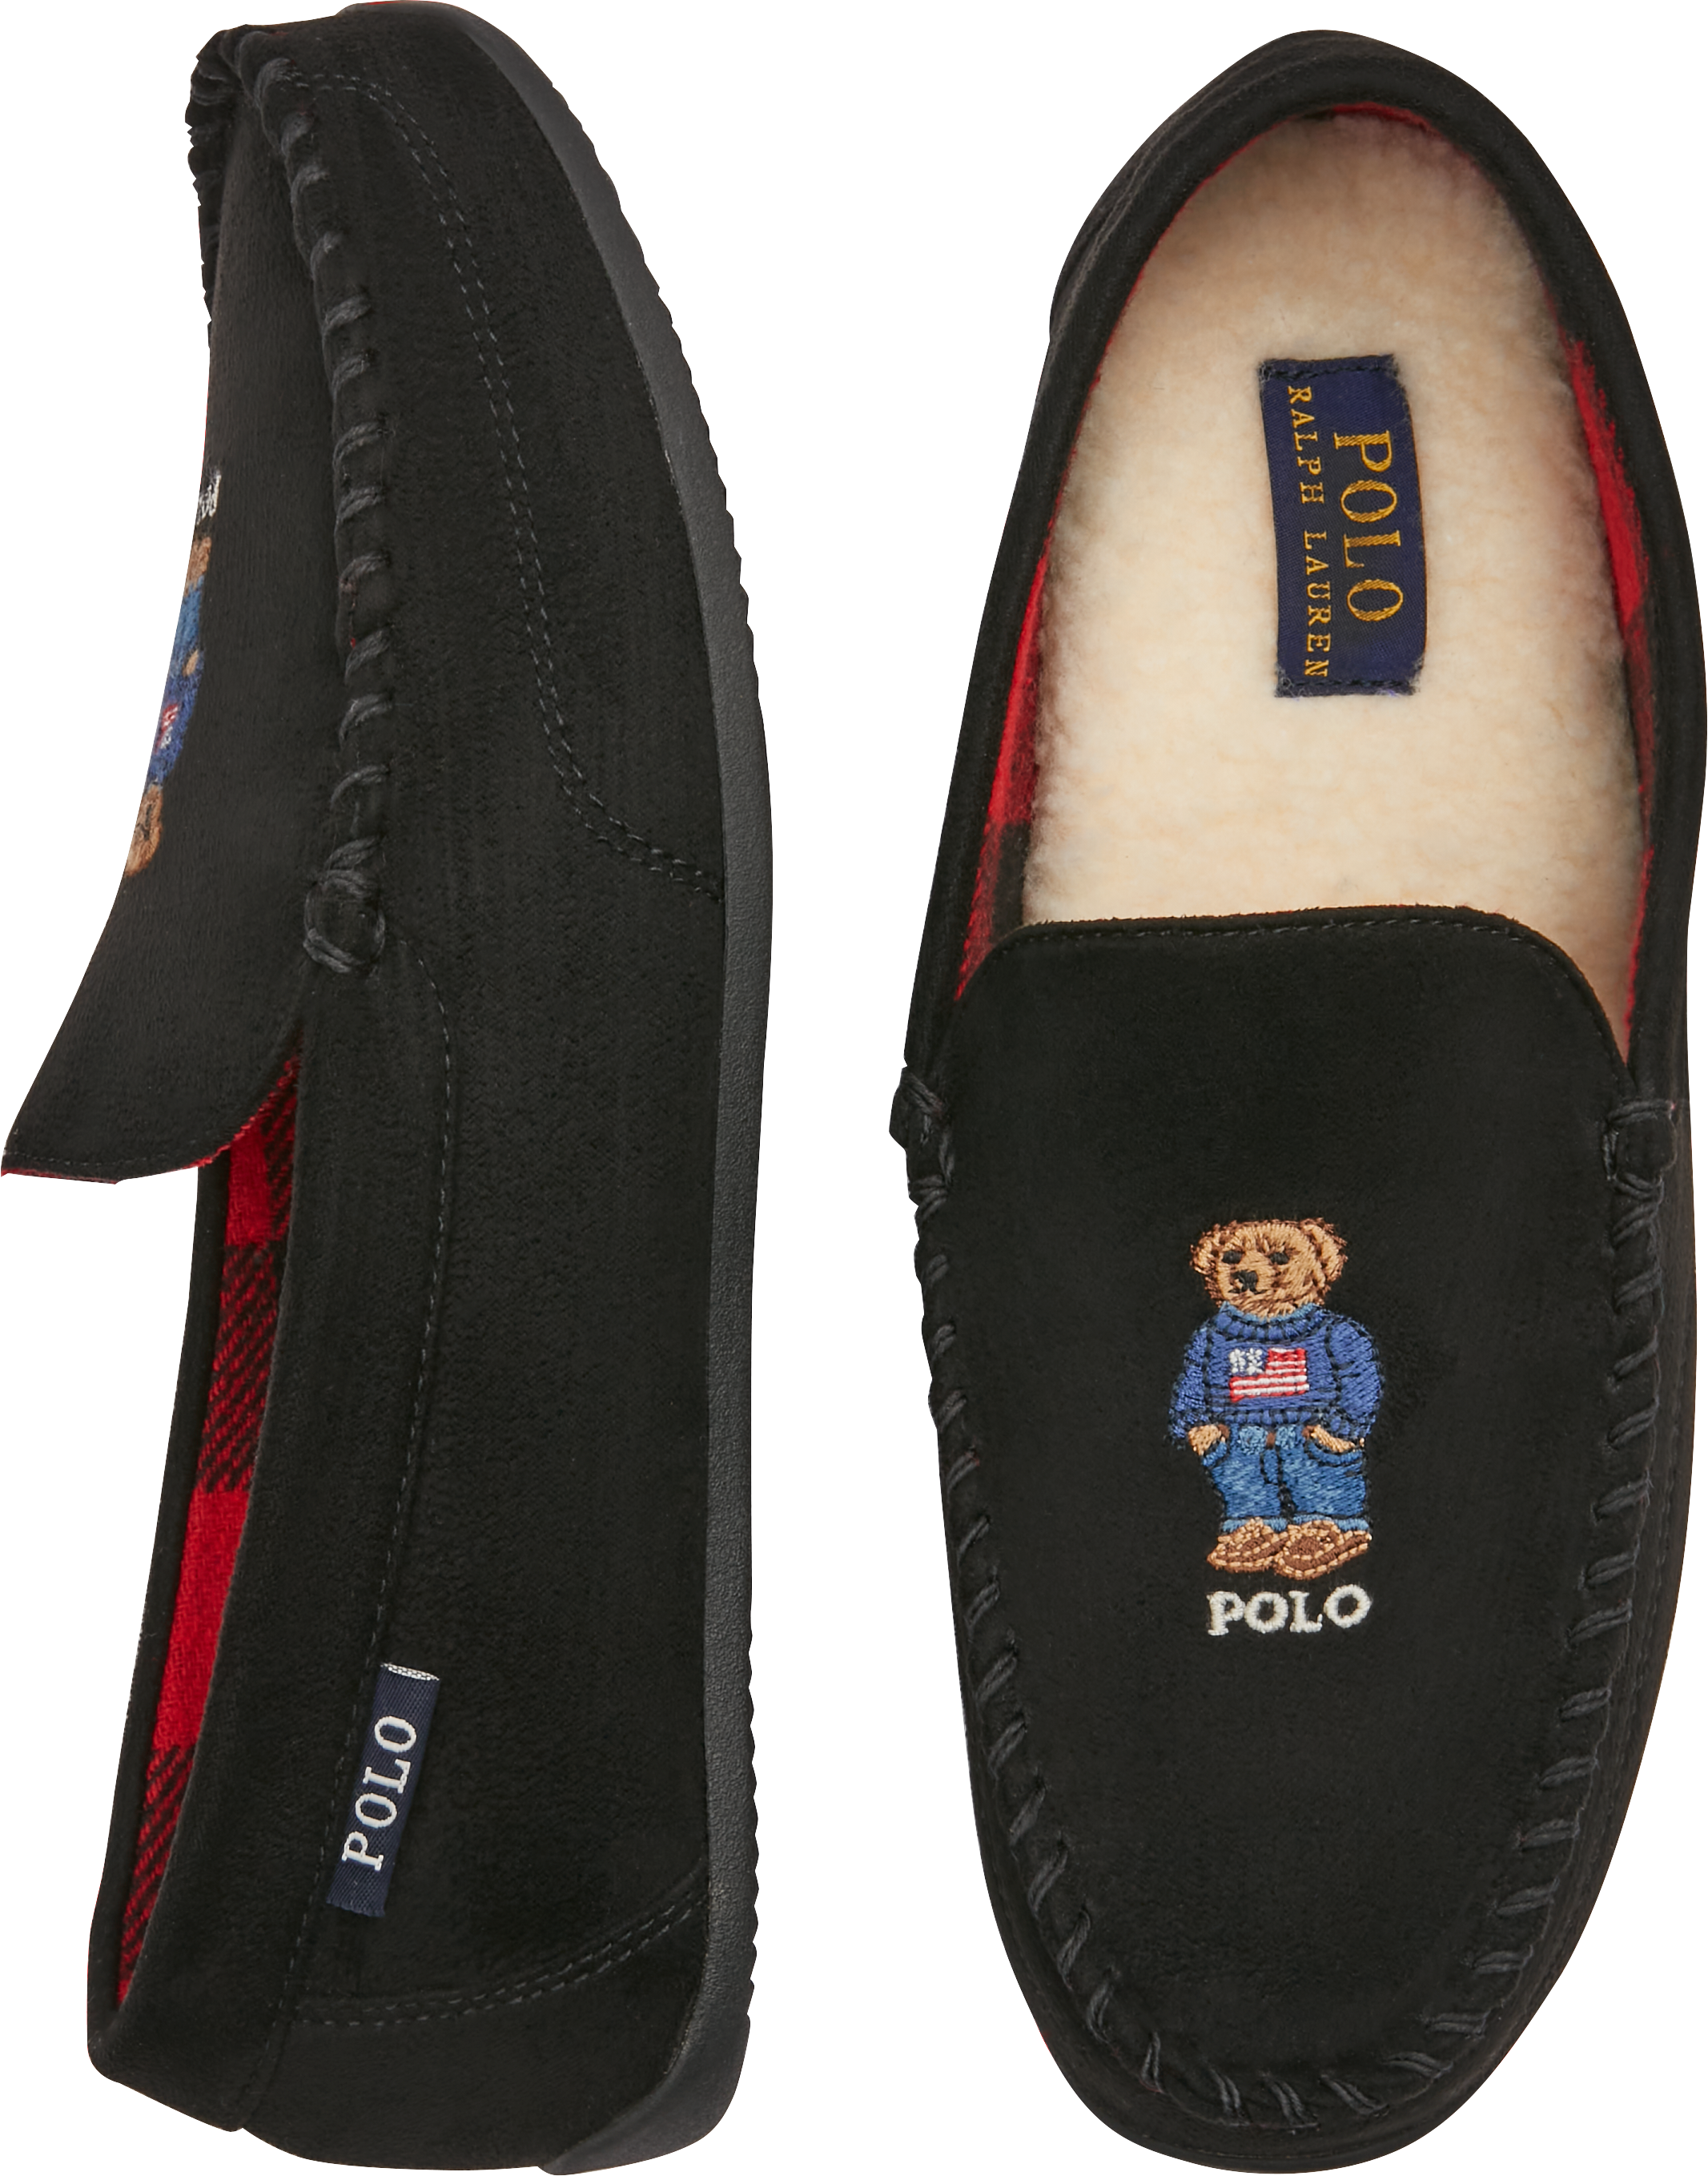 Supersonic hastighed ting tag Polo Ralph Lauren Americana Bear Slippers - Men's Shoes | Men's Wearhouse